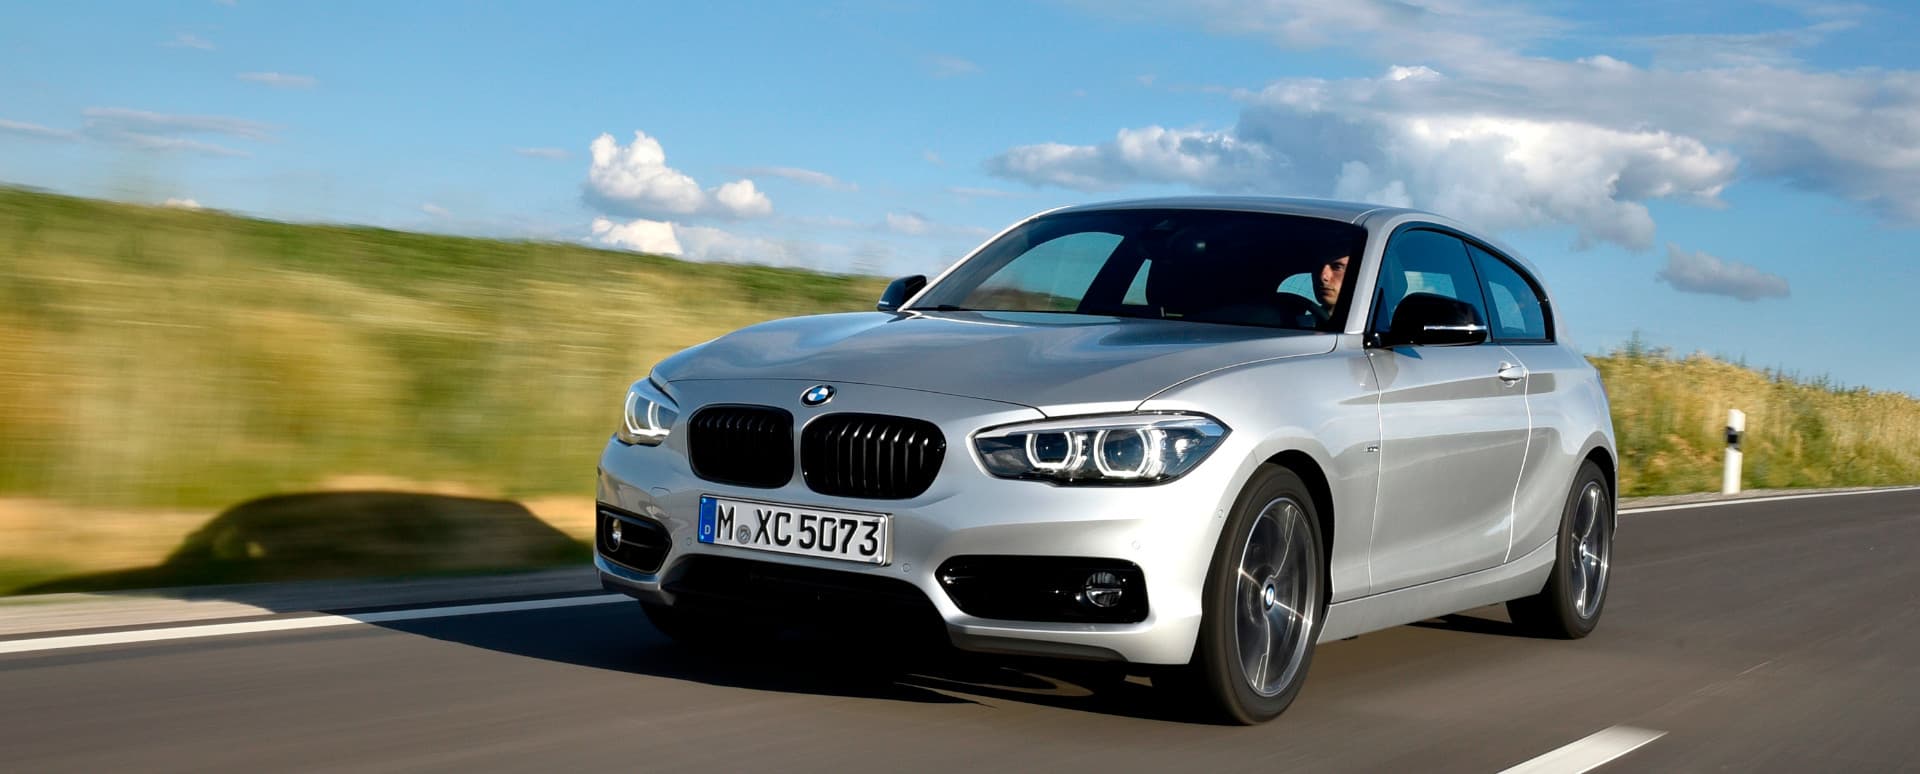 Our Top 5 BMW 1 Series Configurations